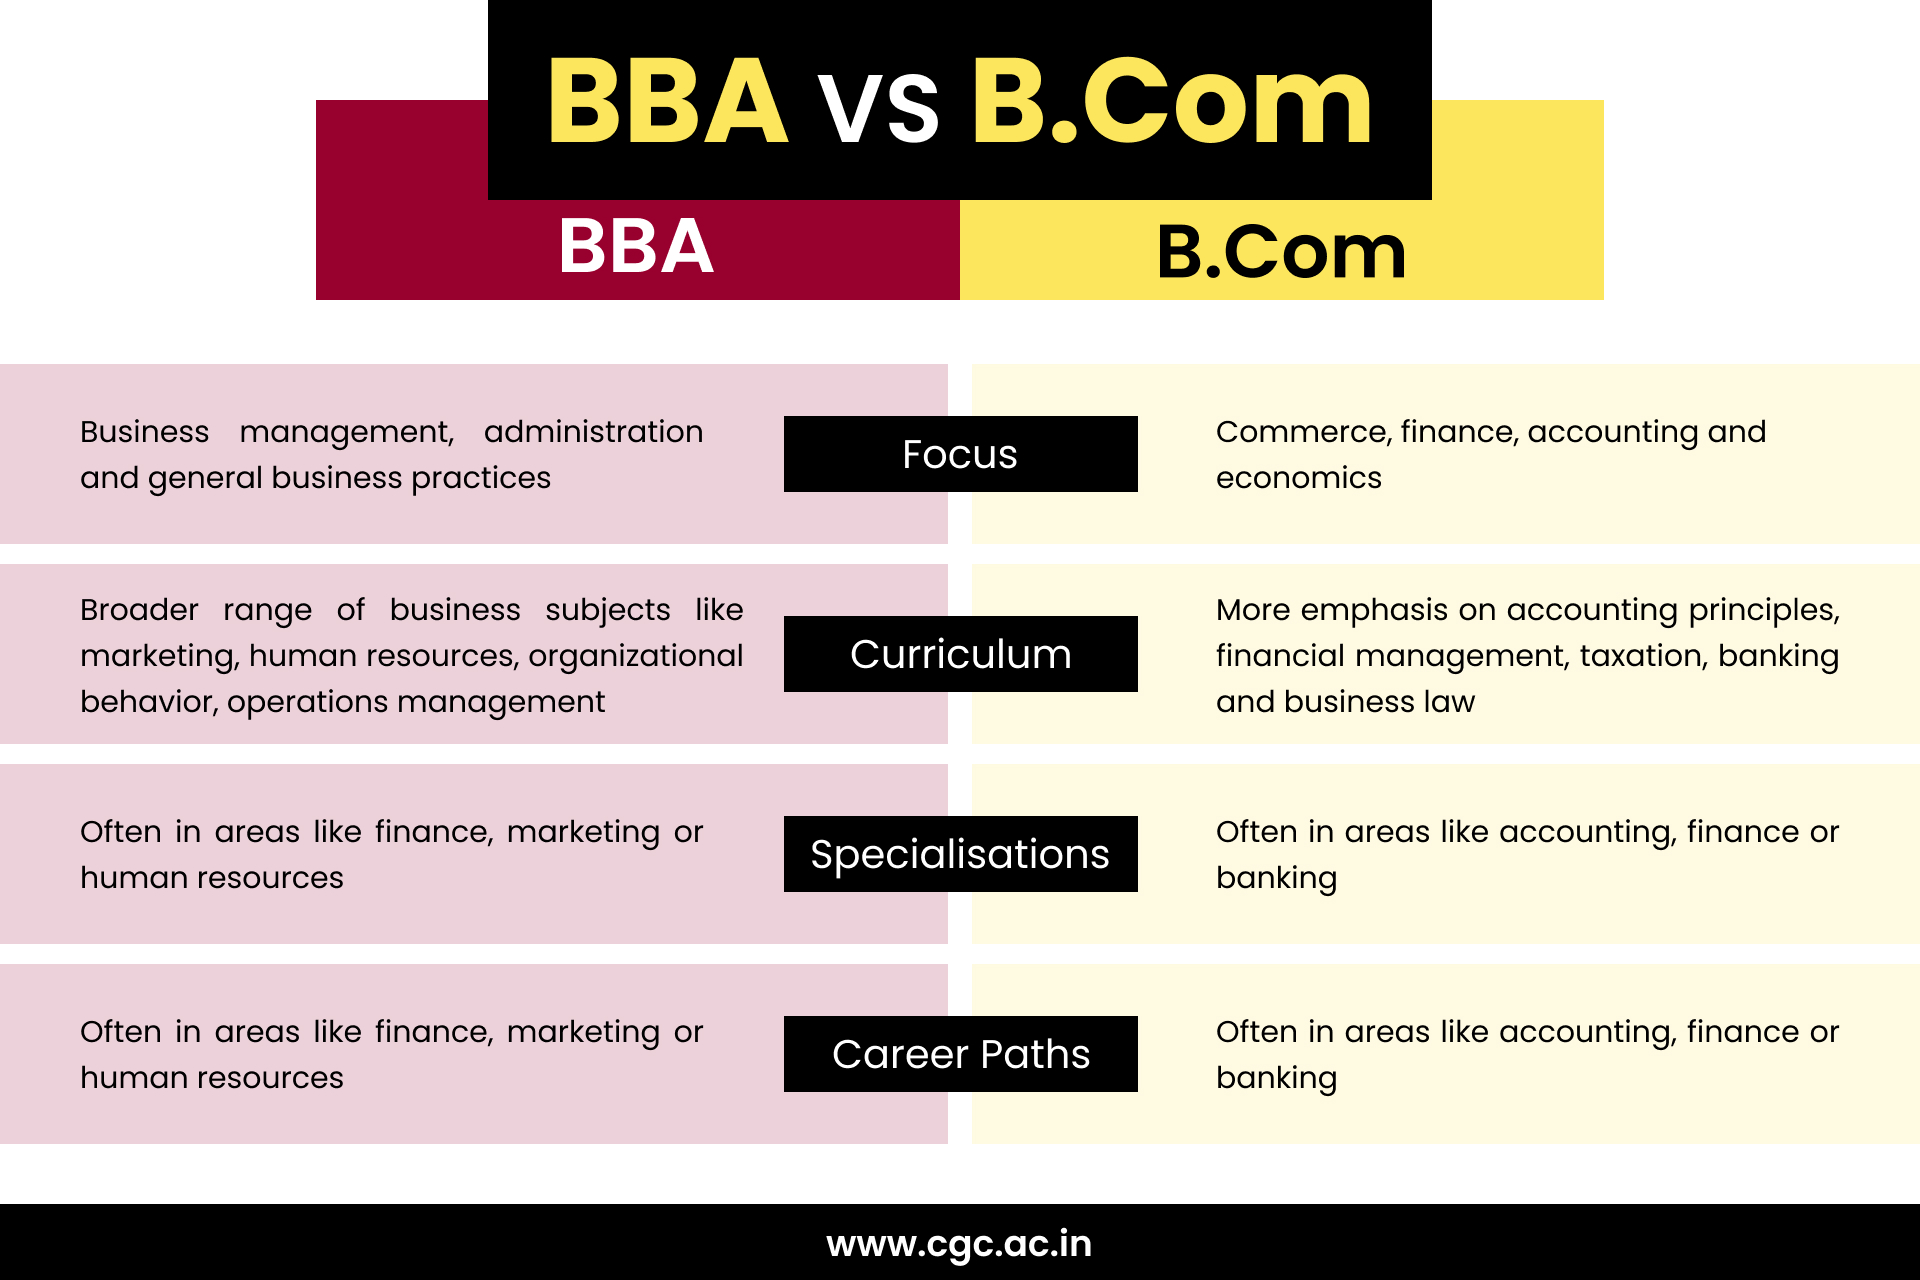 BBS vs B.Com- Which is Better